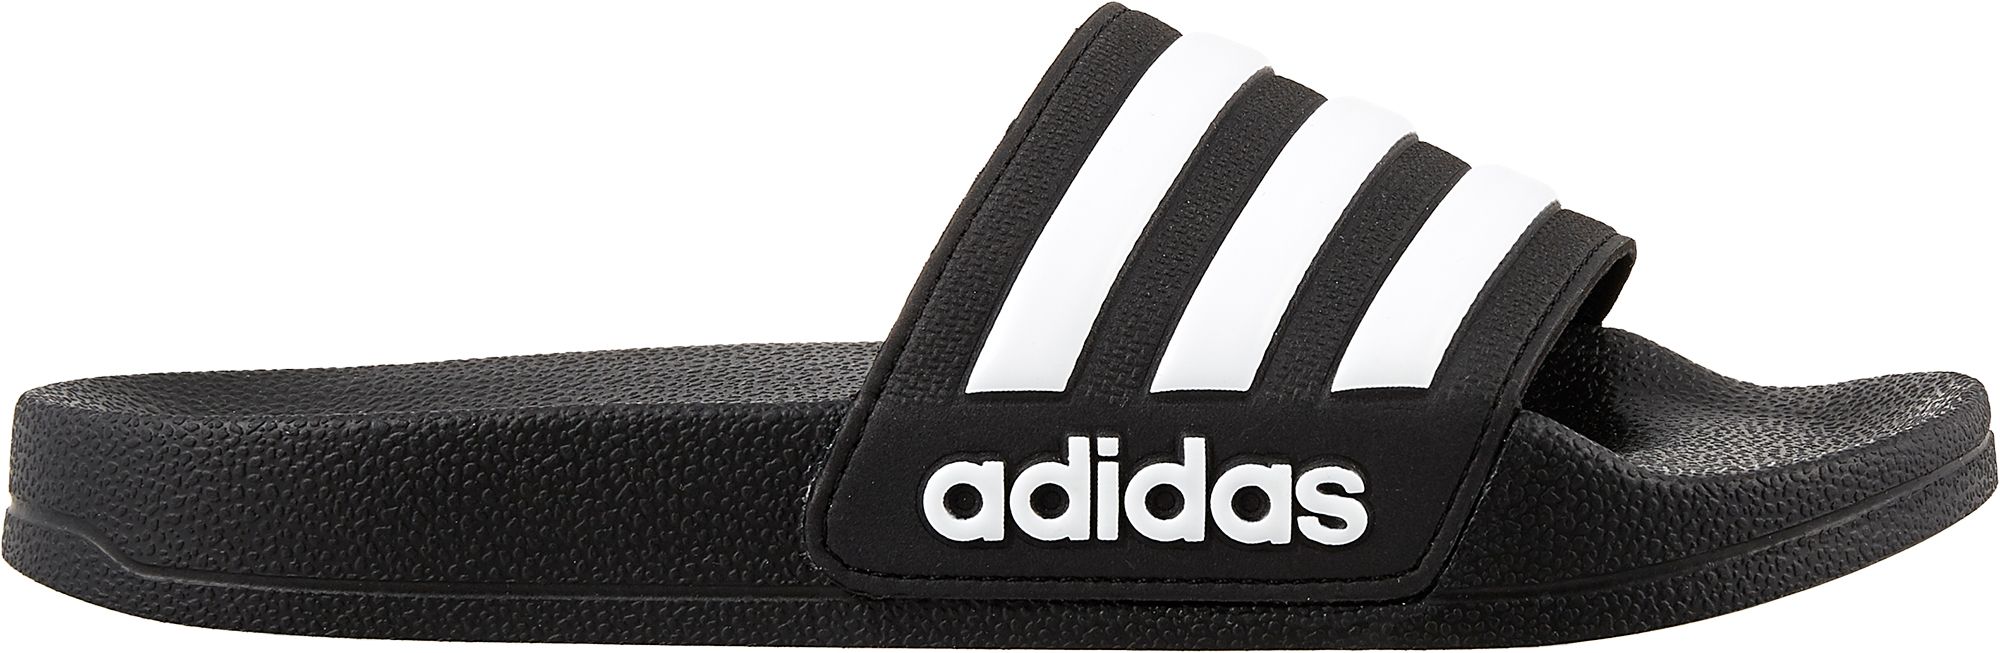 adidas sandals offers online